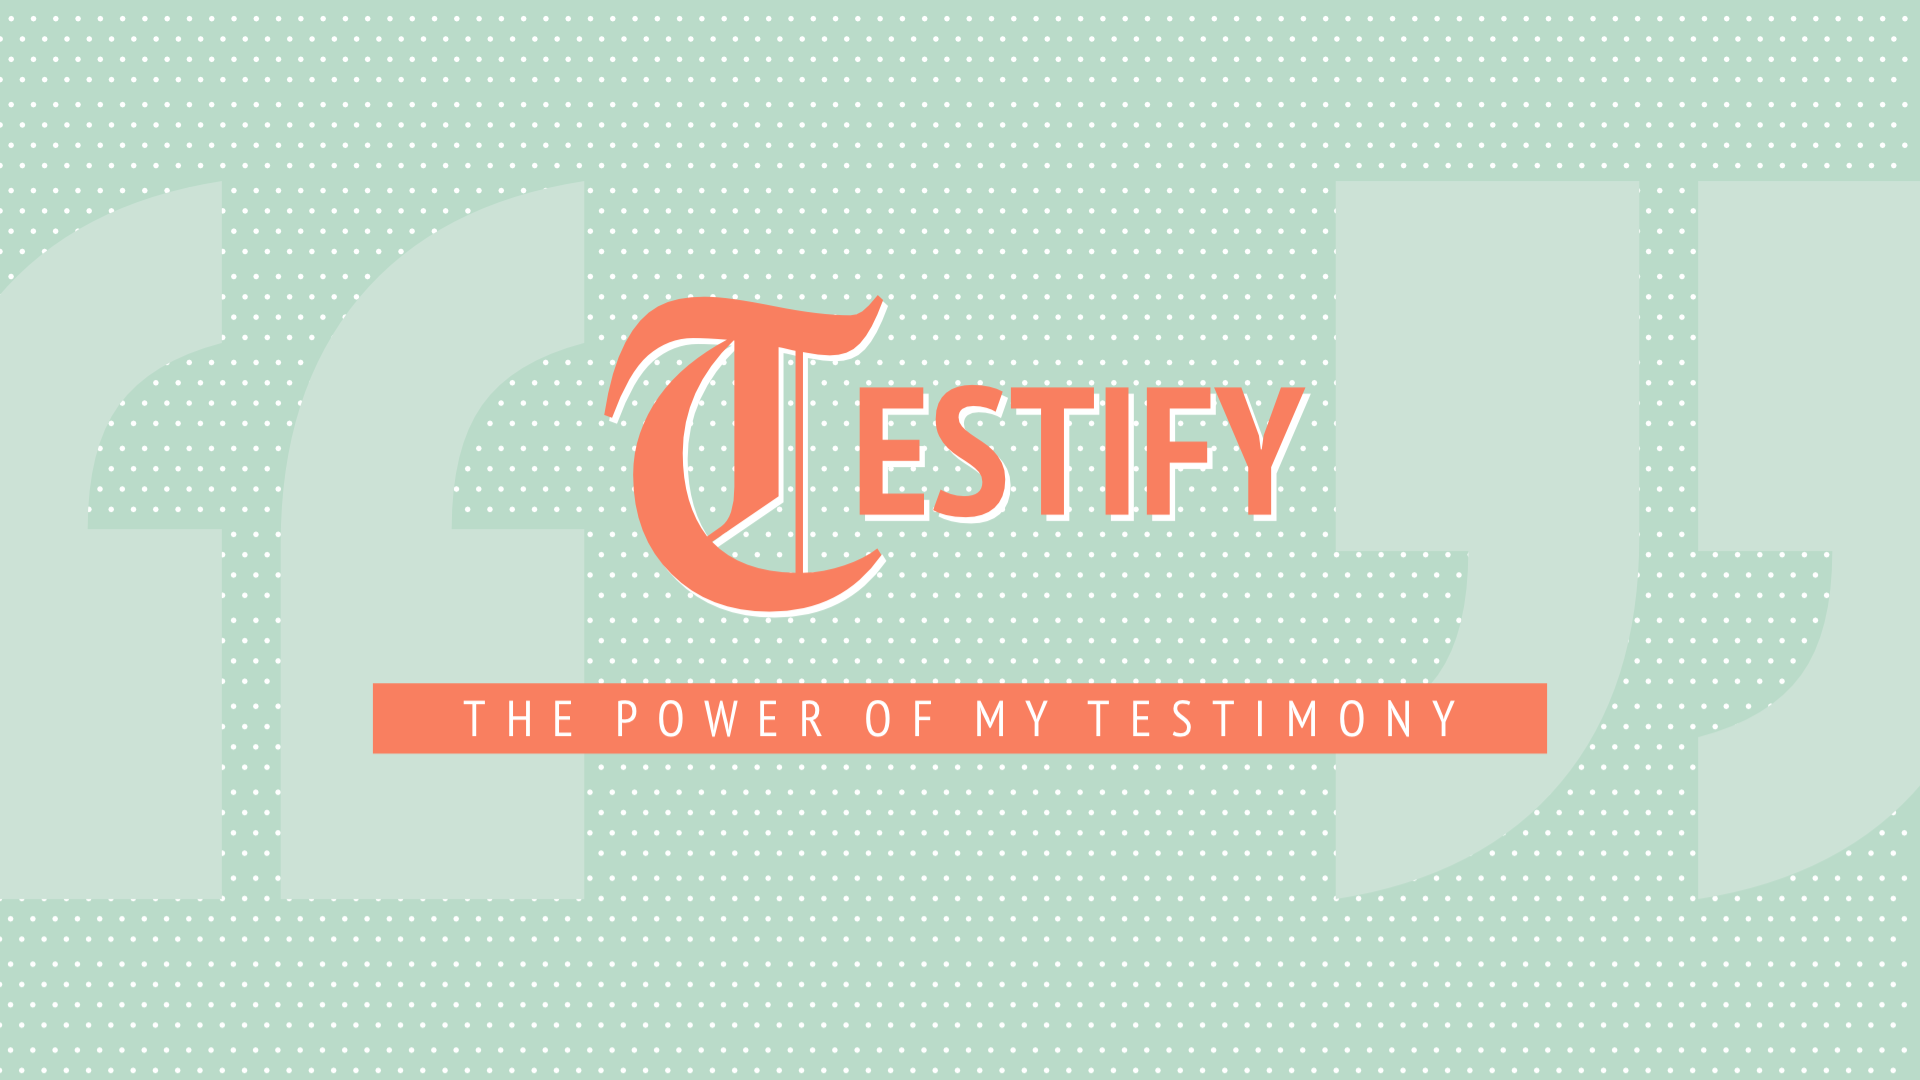 Testify: 5 Invitations Our Testimony Offers